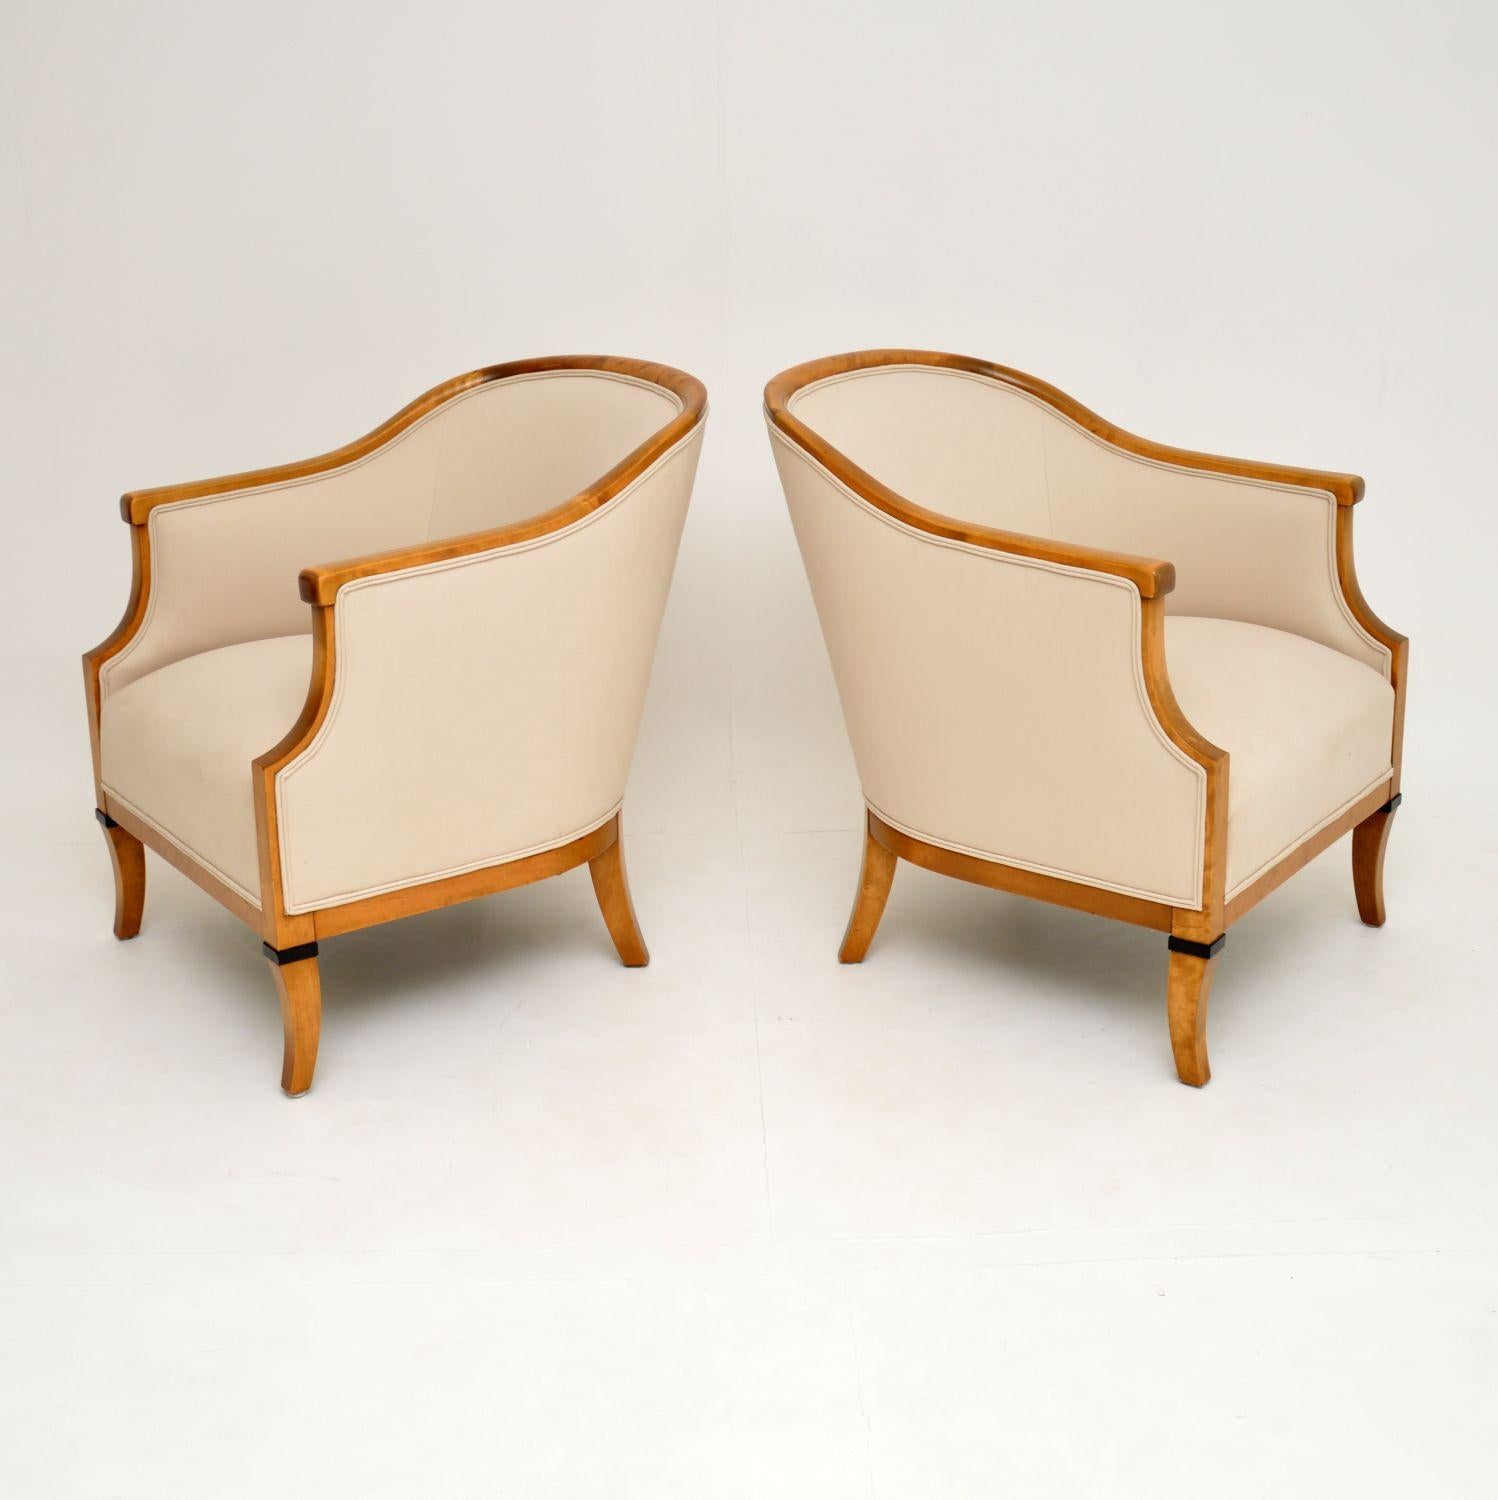 A stunning pair of antique Swedish armchairs made from Satin Birch. These date from circa 1910-1920 period, they are extremely well made.

We’ve just had the frames French polished, and they have been newly upholstered in our lovely cream fabric.